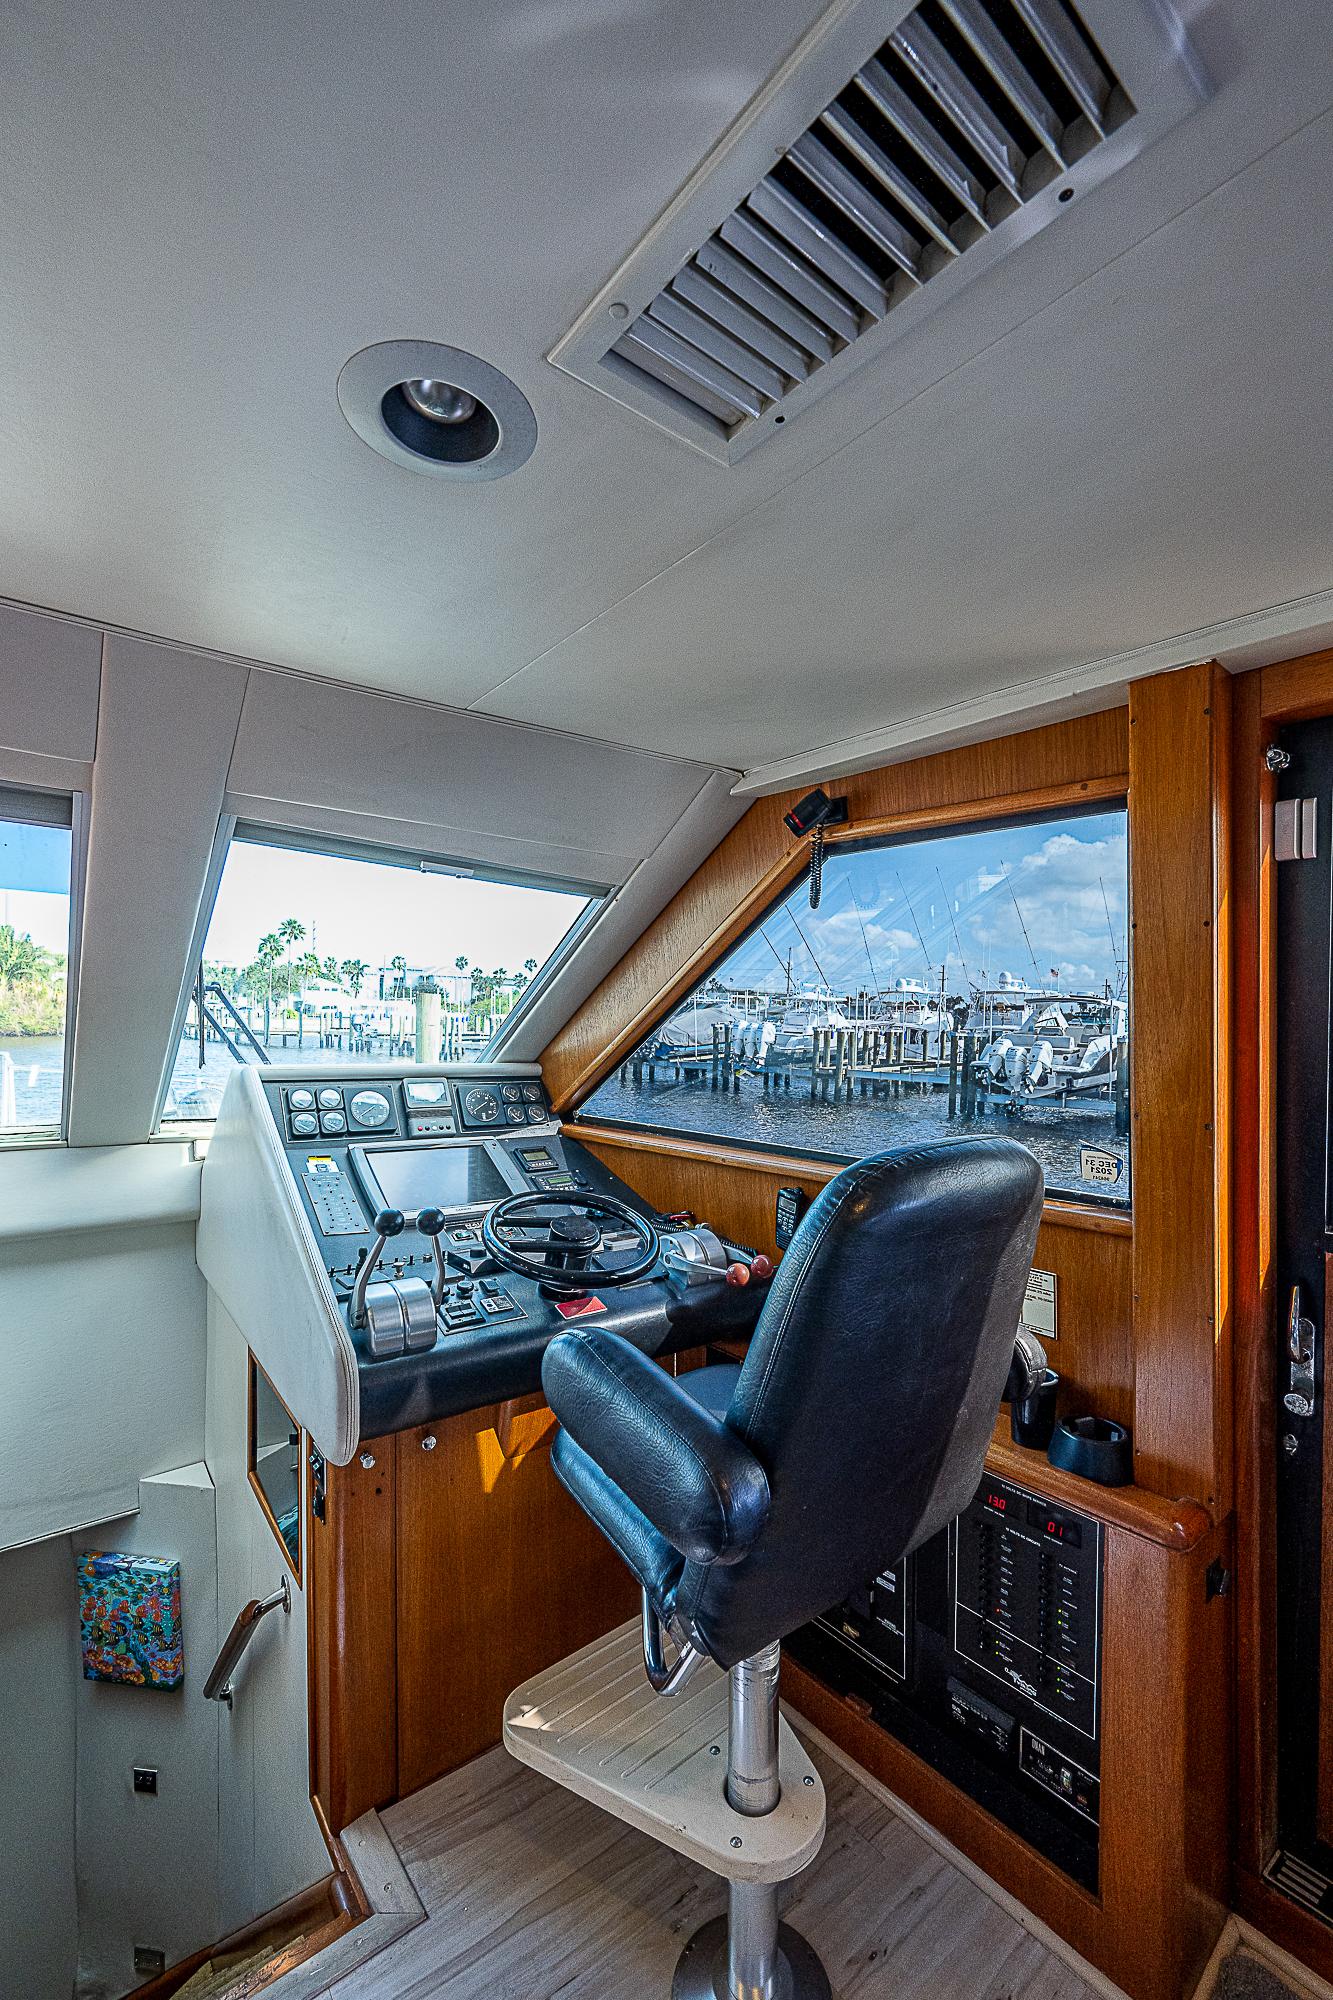 Viking 50 Cockpit Motor Yacht Freedom-Lower Helm Station, Electronics and Helm Seat